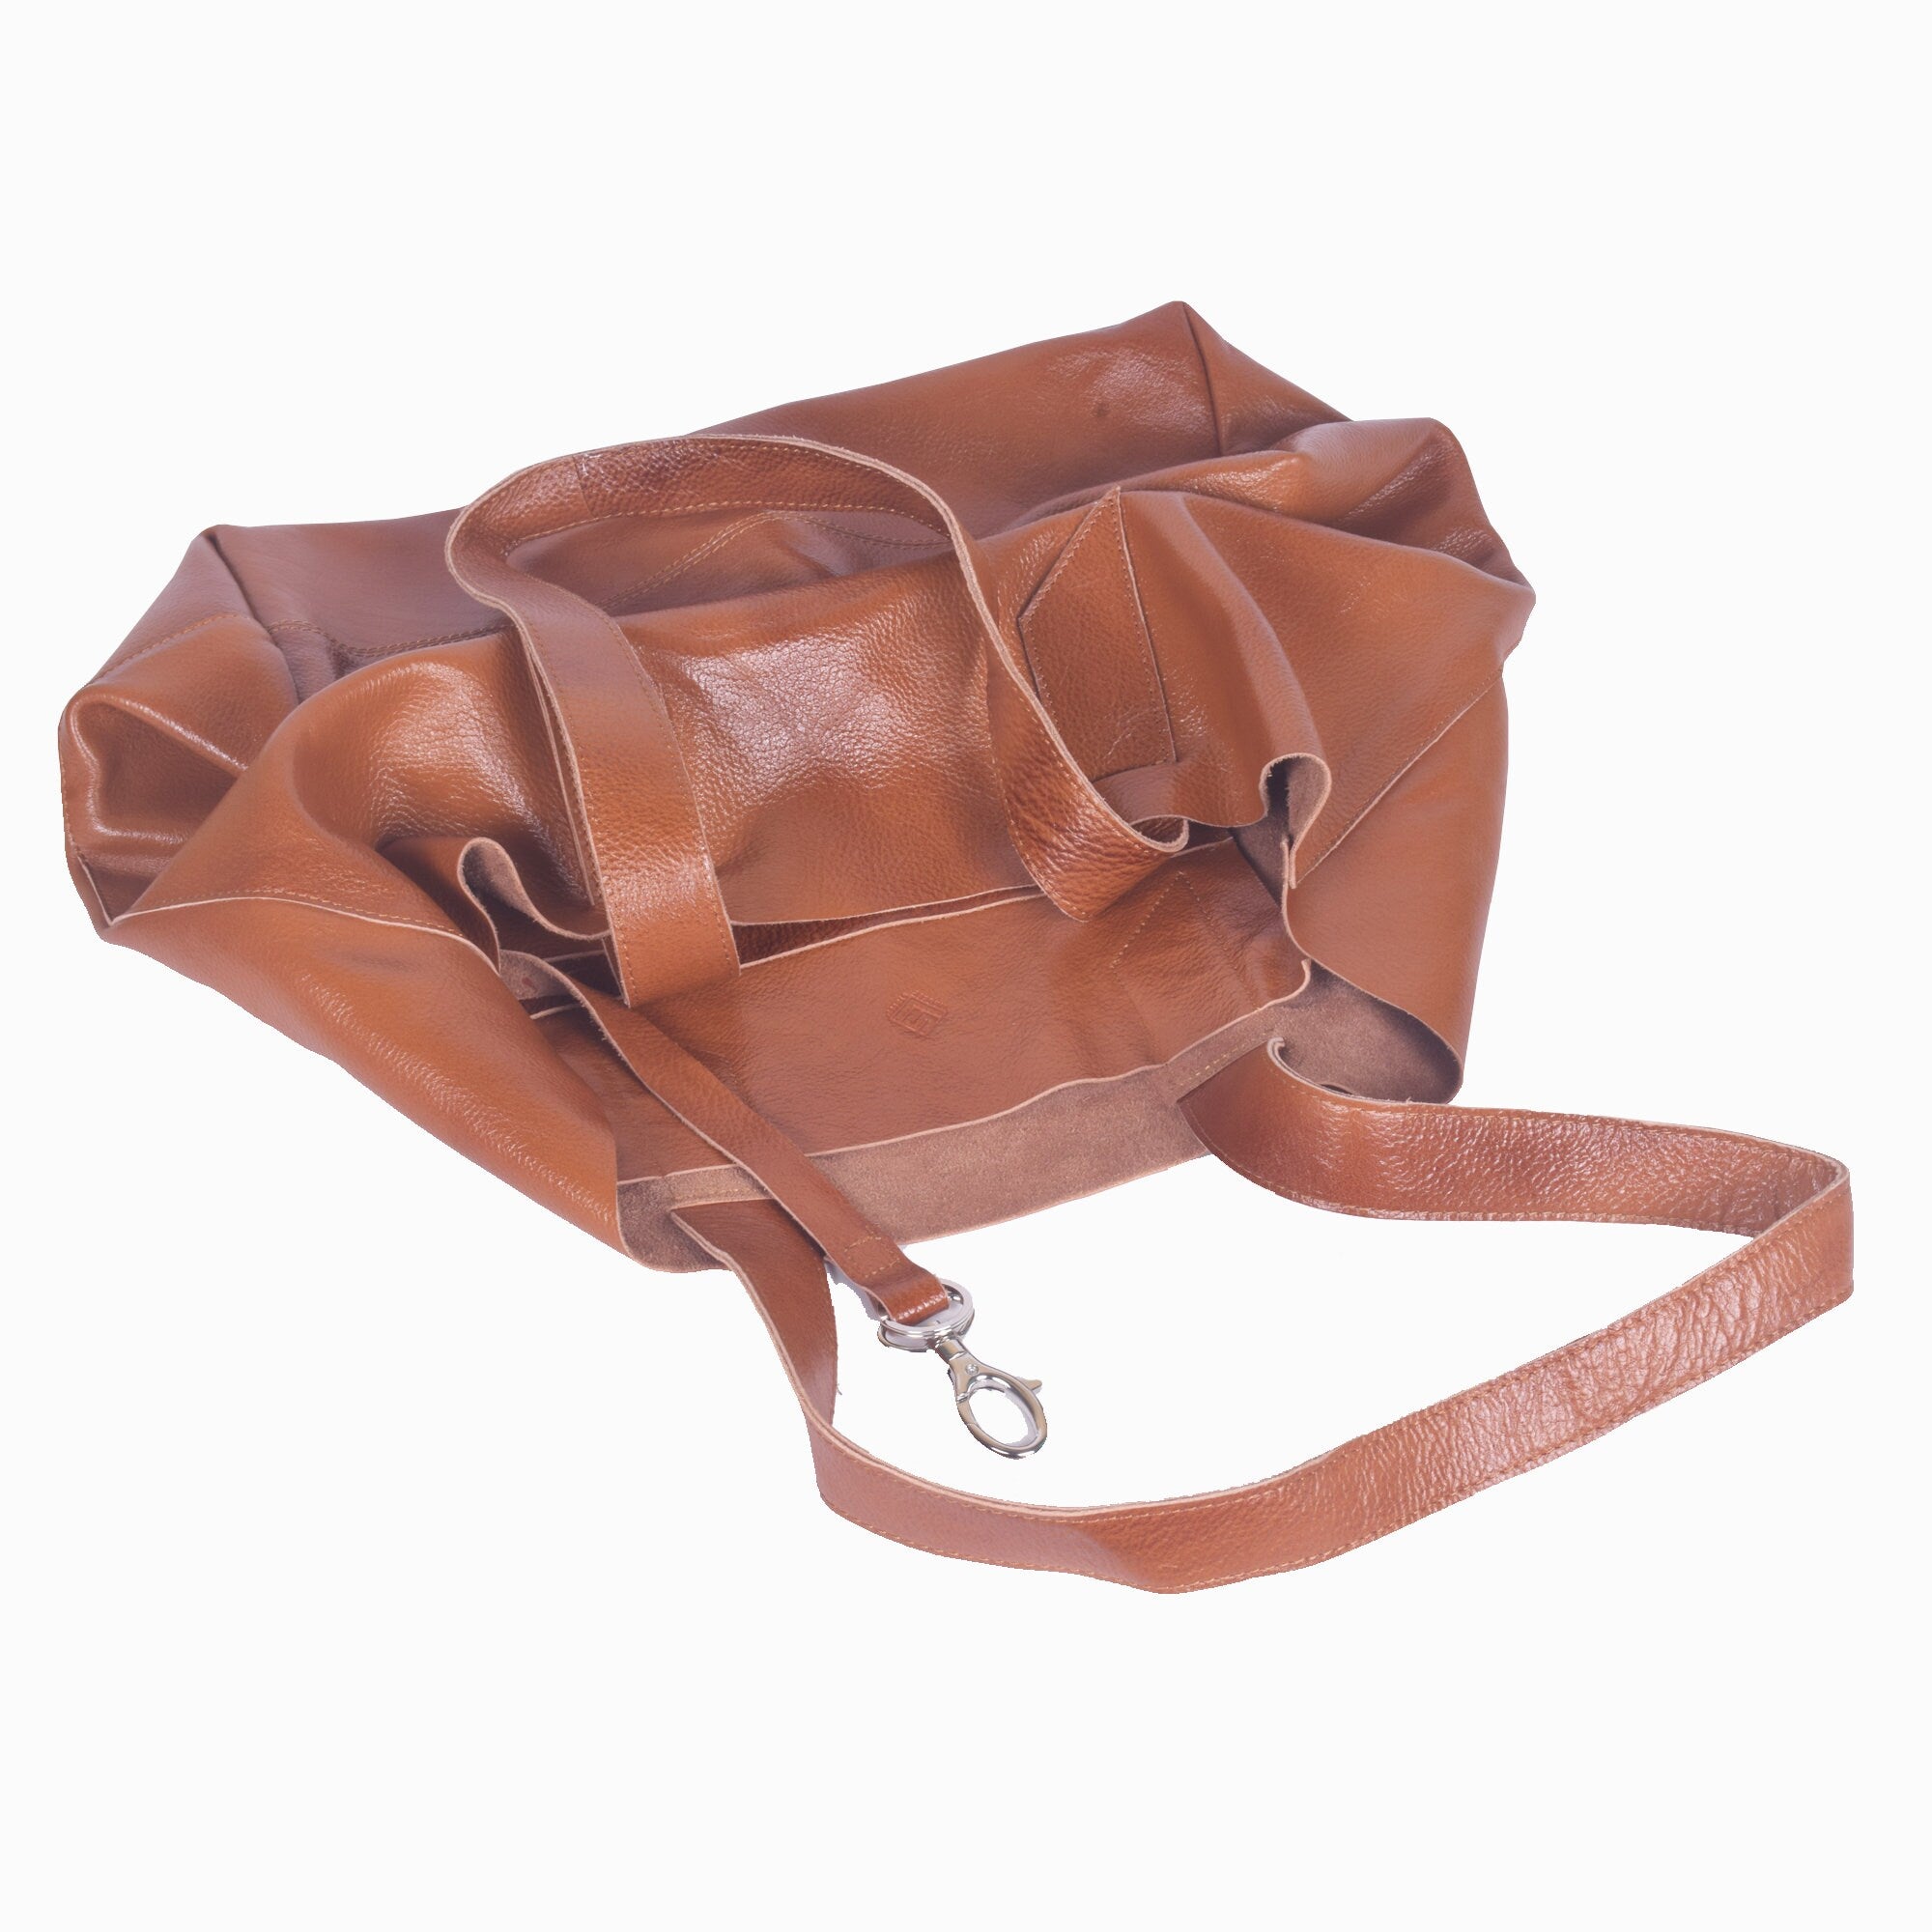 Van Heusen Tan Brown Textured Structured Sling Bag Price in India, Full  Specifications & Offers | DTashion.com